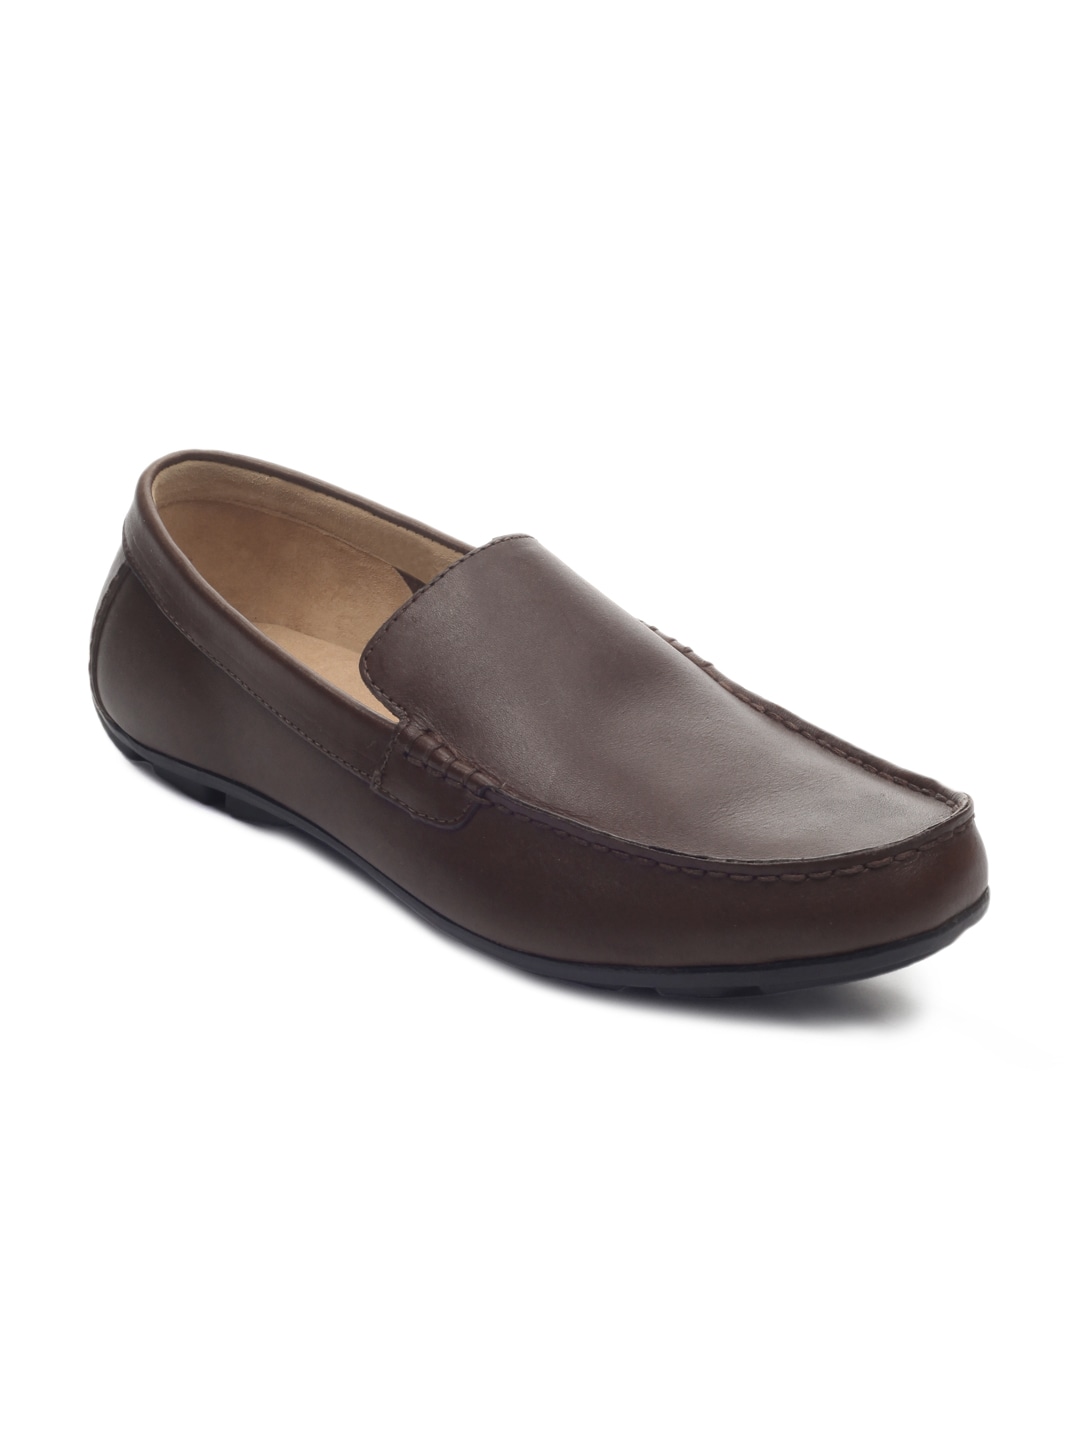 Clarks Men Brown Leather Loafers